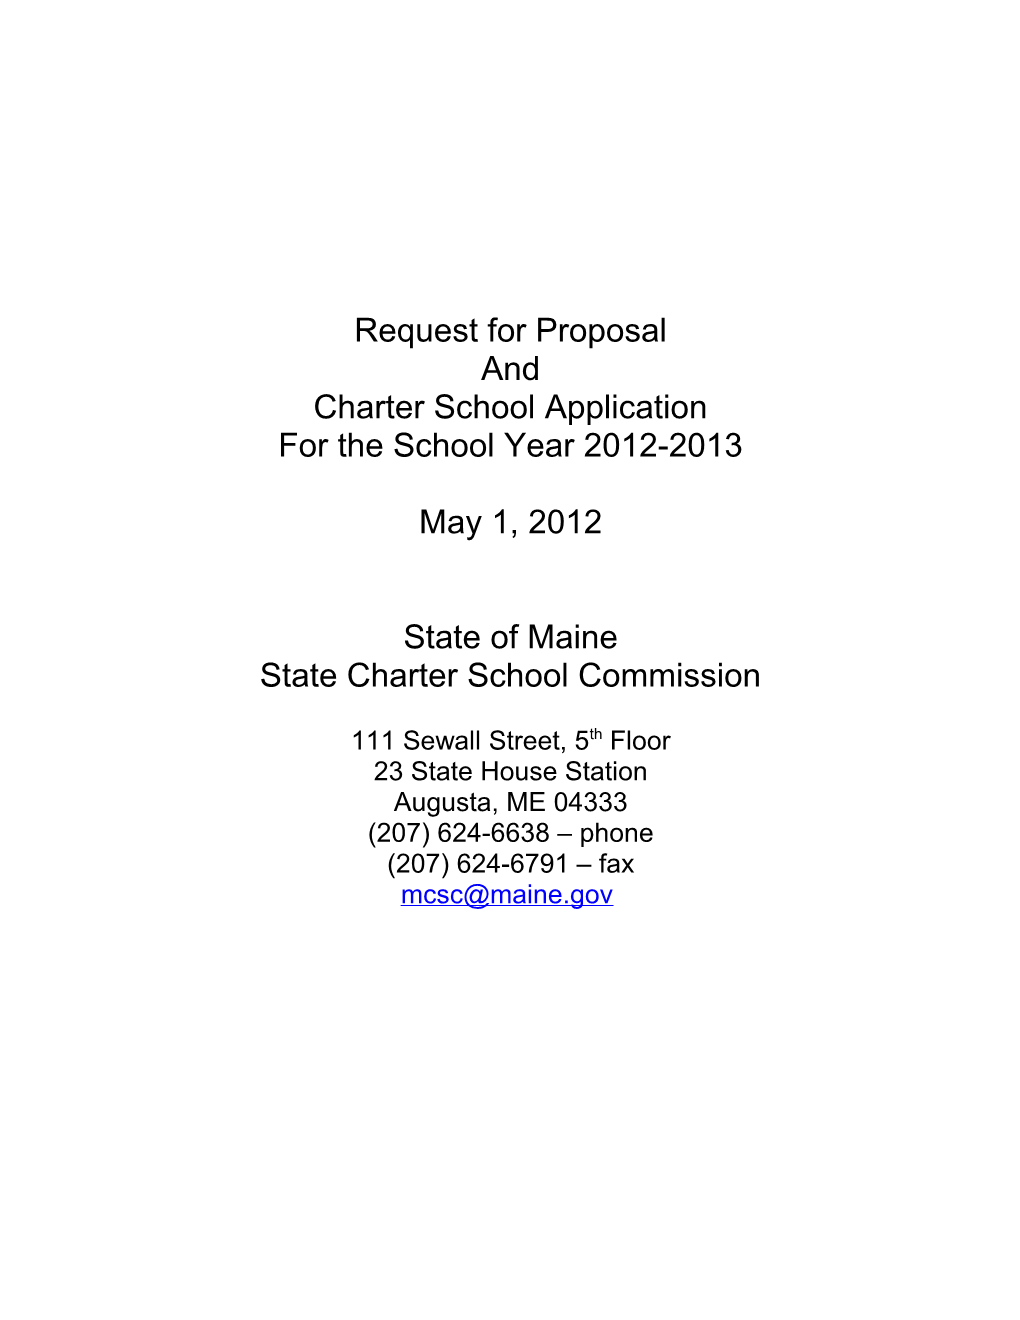 Request for Proposal s78